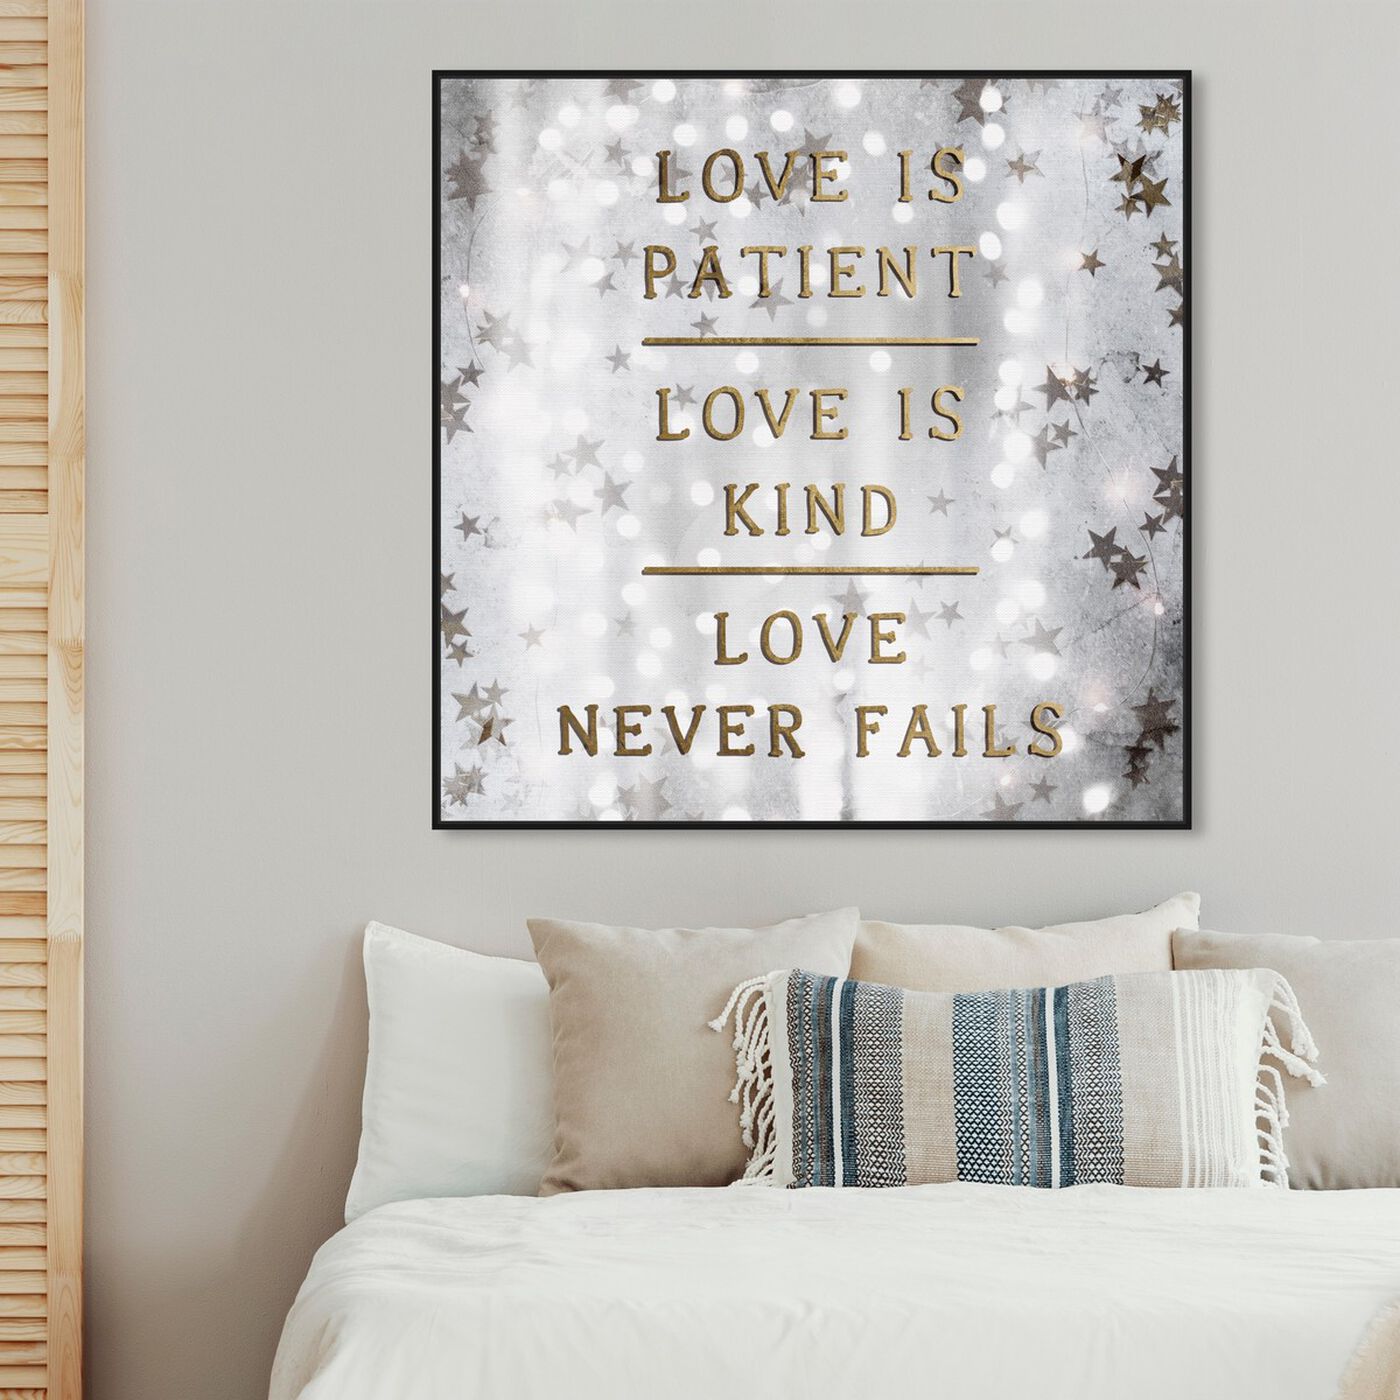 Hanging view of Love is Patient Love is Kind featuring typography and quotes and love quotes and sayings art.